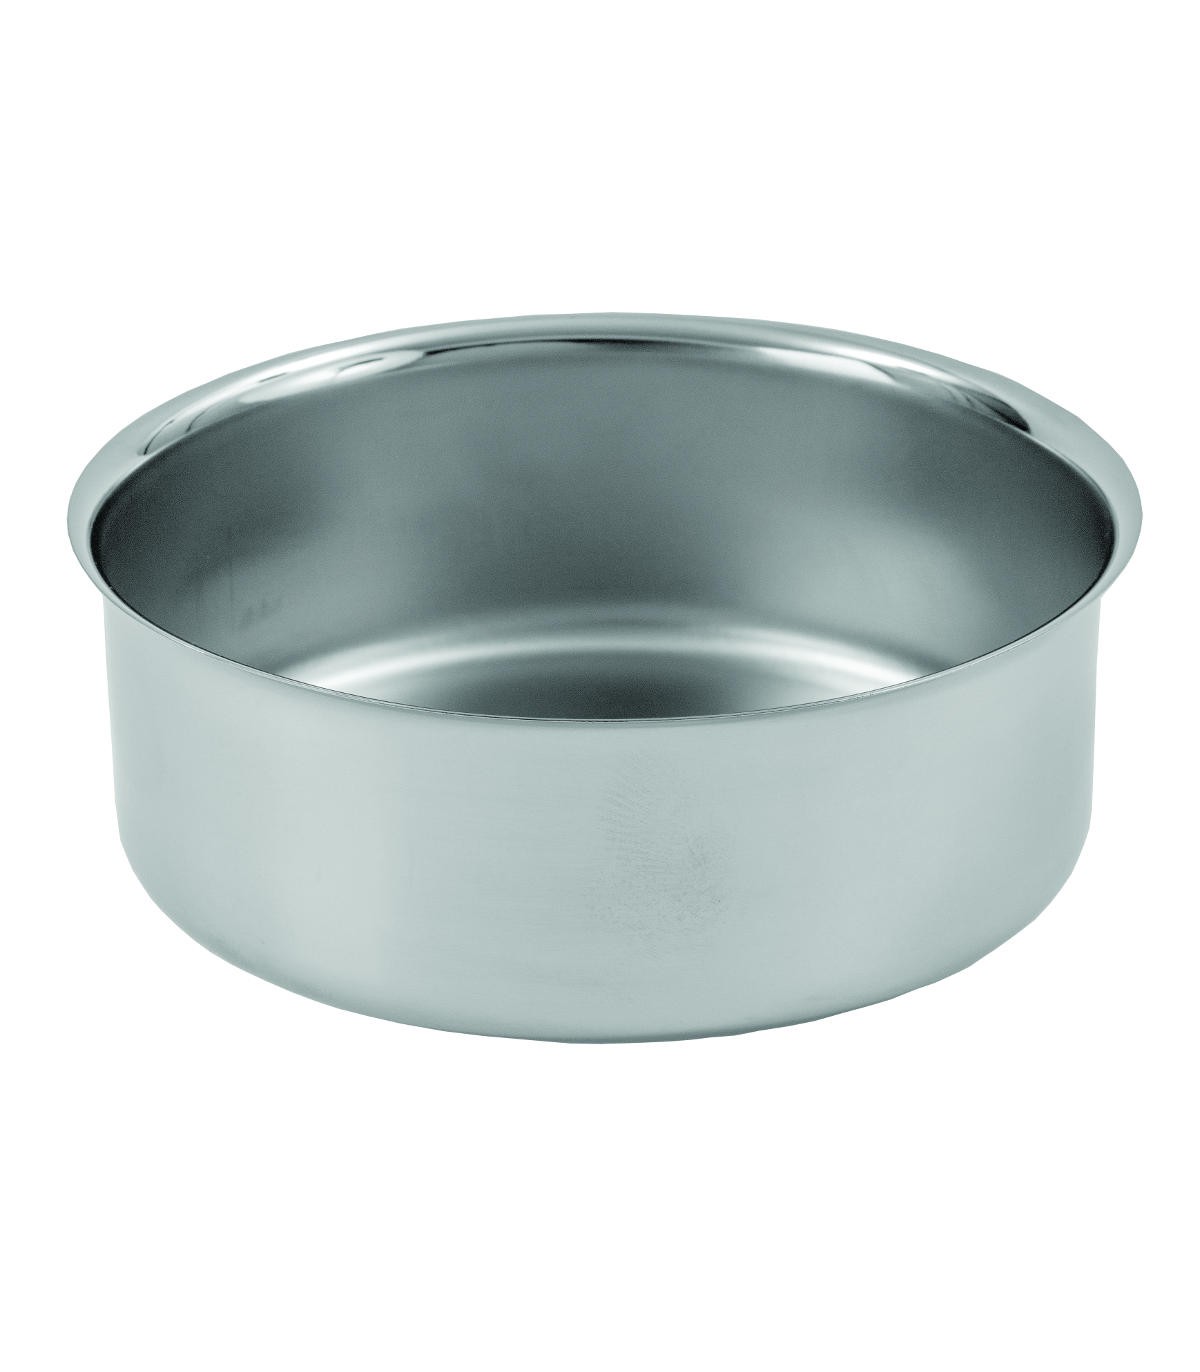 https://www.stellinox.com/4229-superlarge_default/stainless-steel-container-for-bucket-stand-746164-or-ashtray-stand-746179.jpg